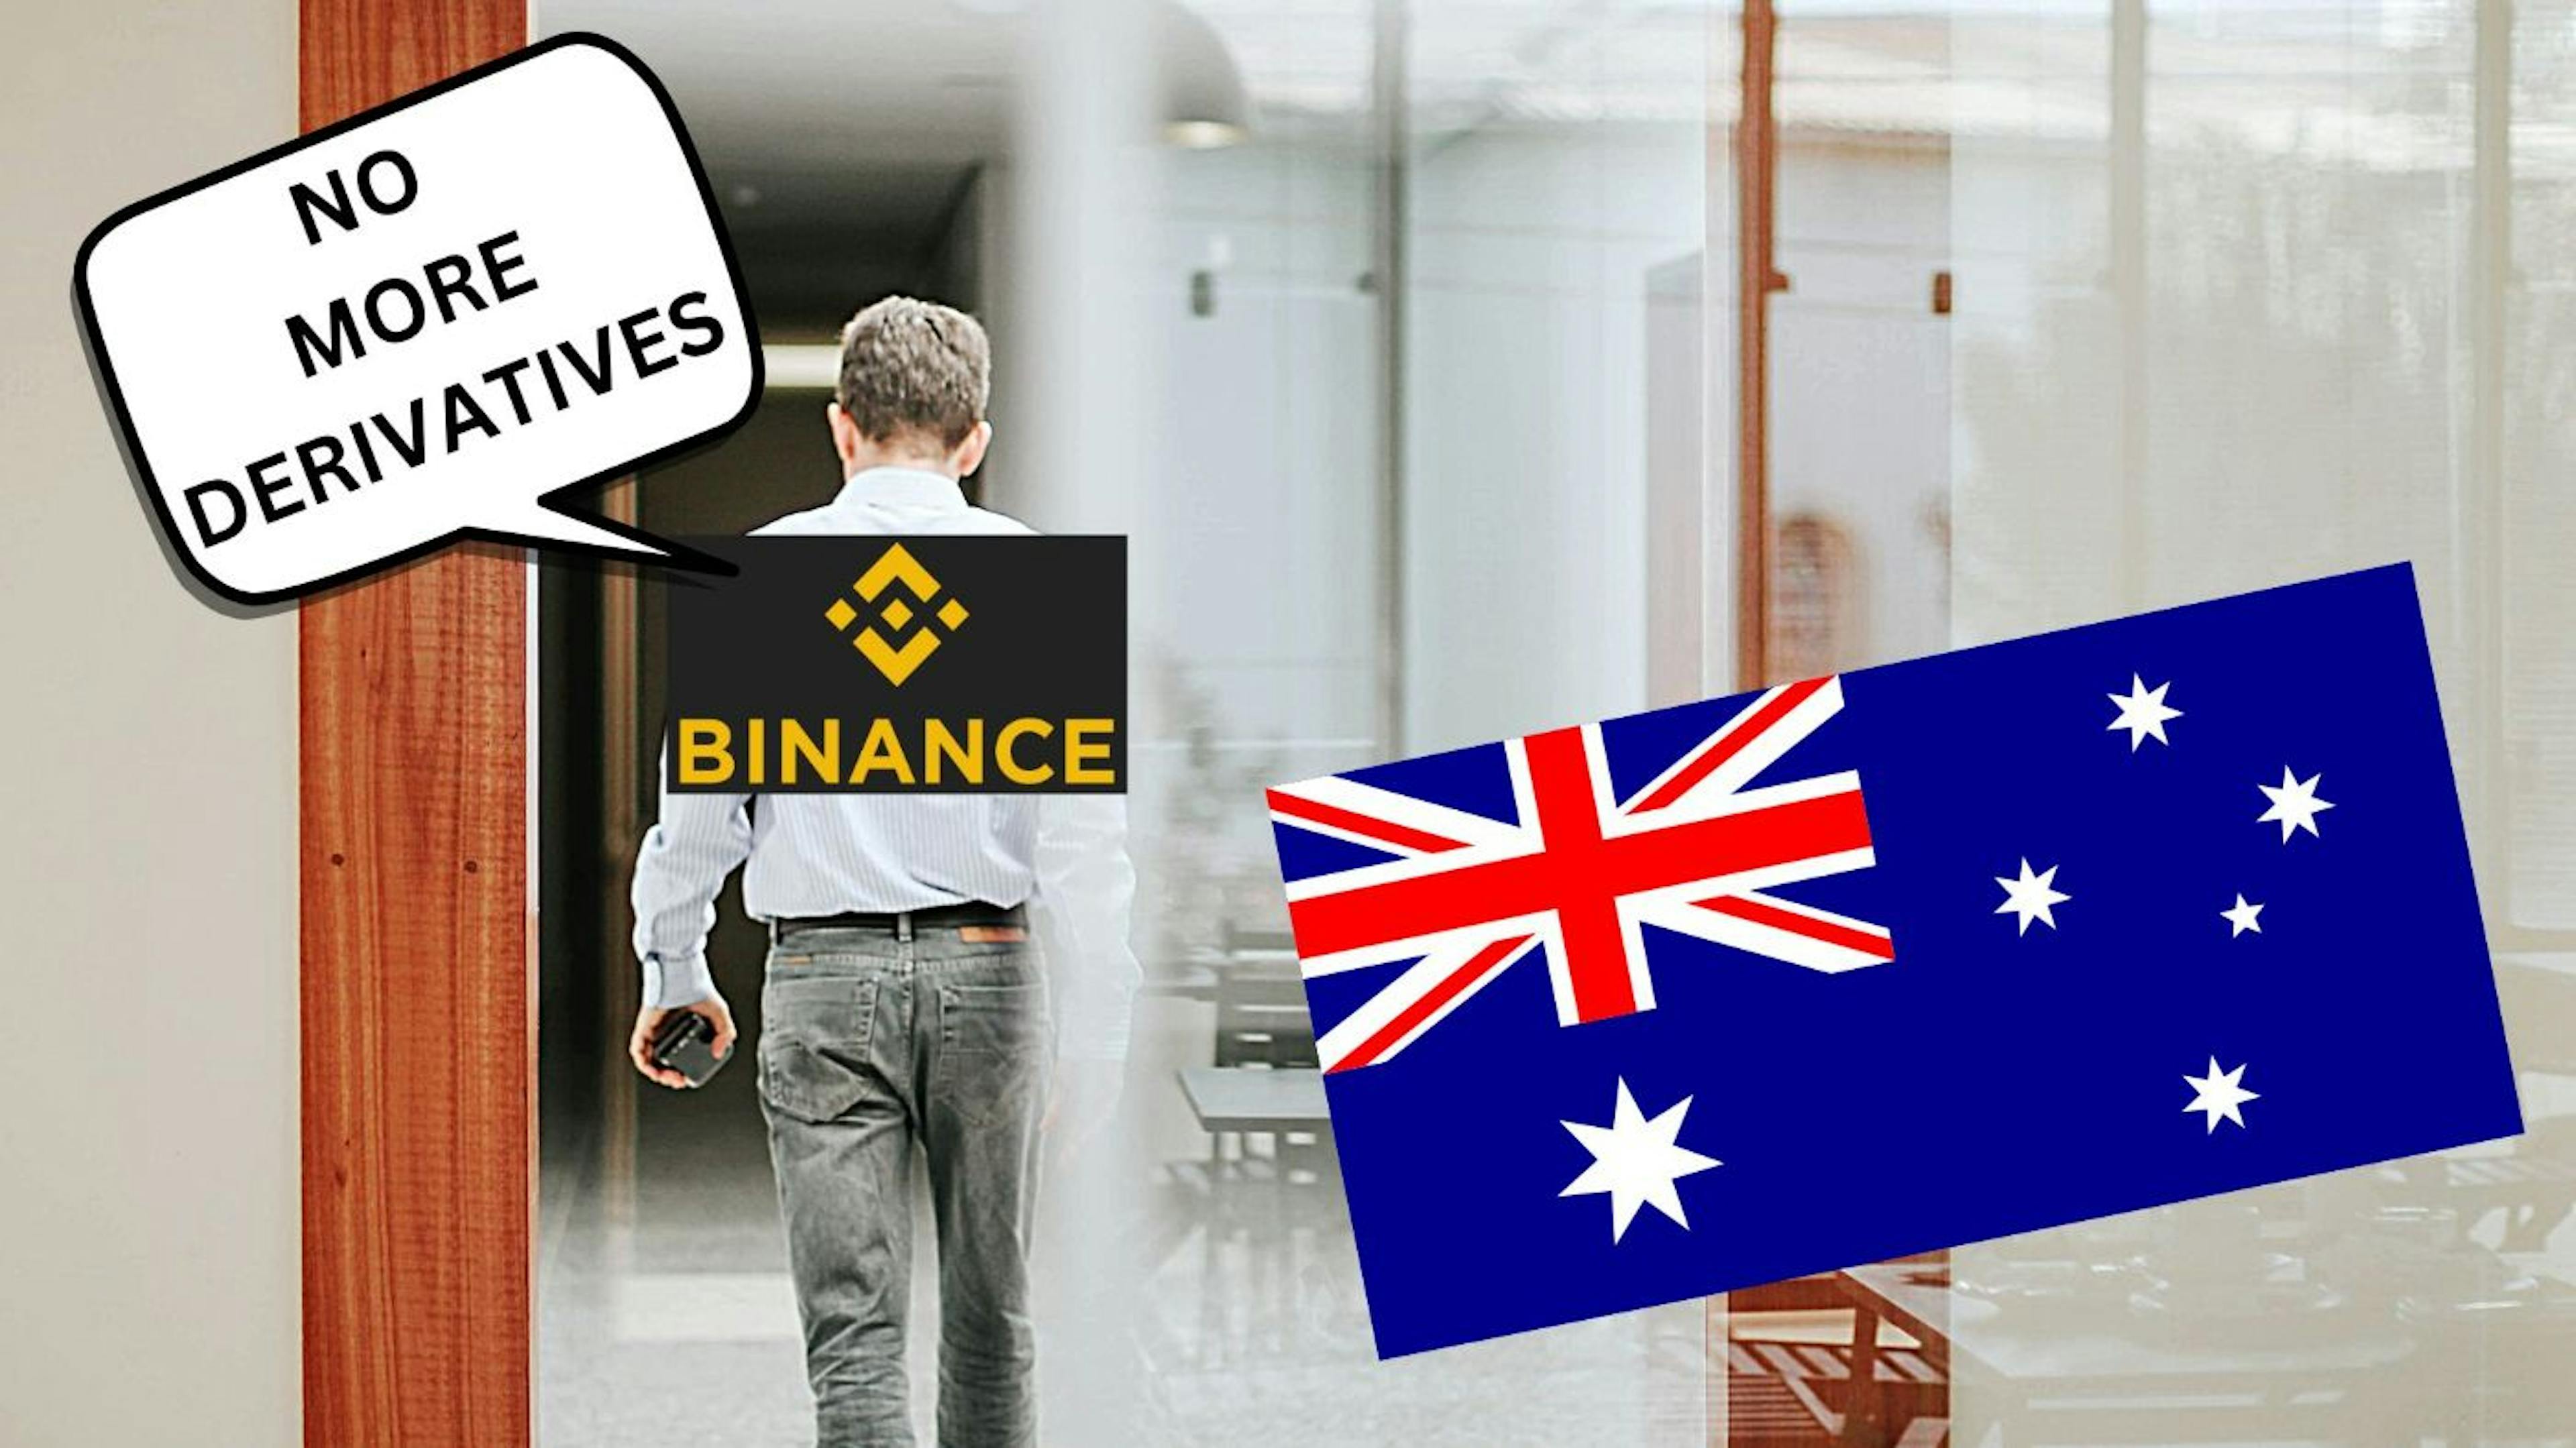 featured image - Australia Cancels Binance's Derivatives Business License: Here's Why